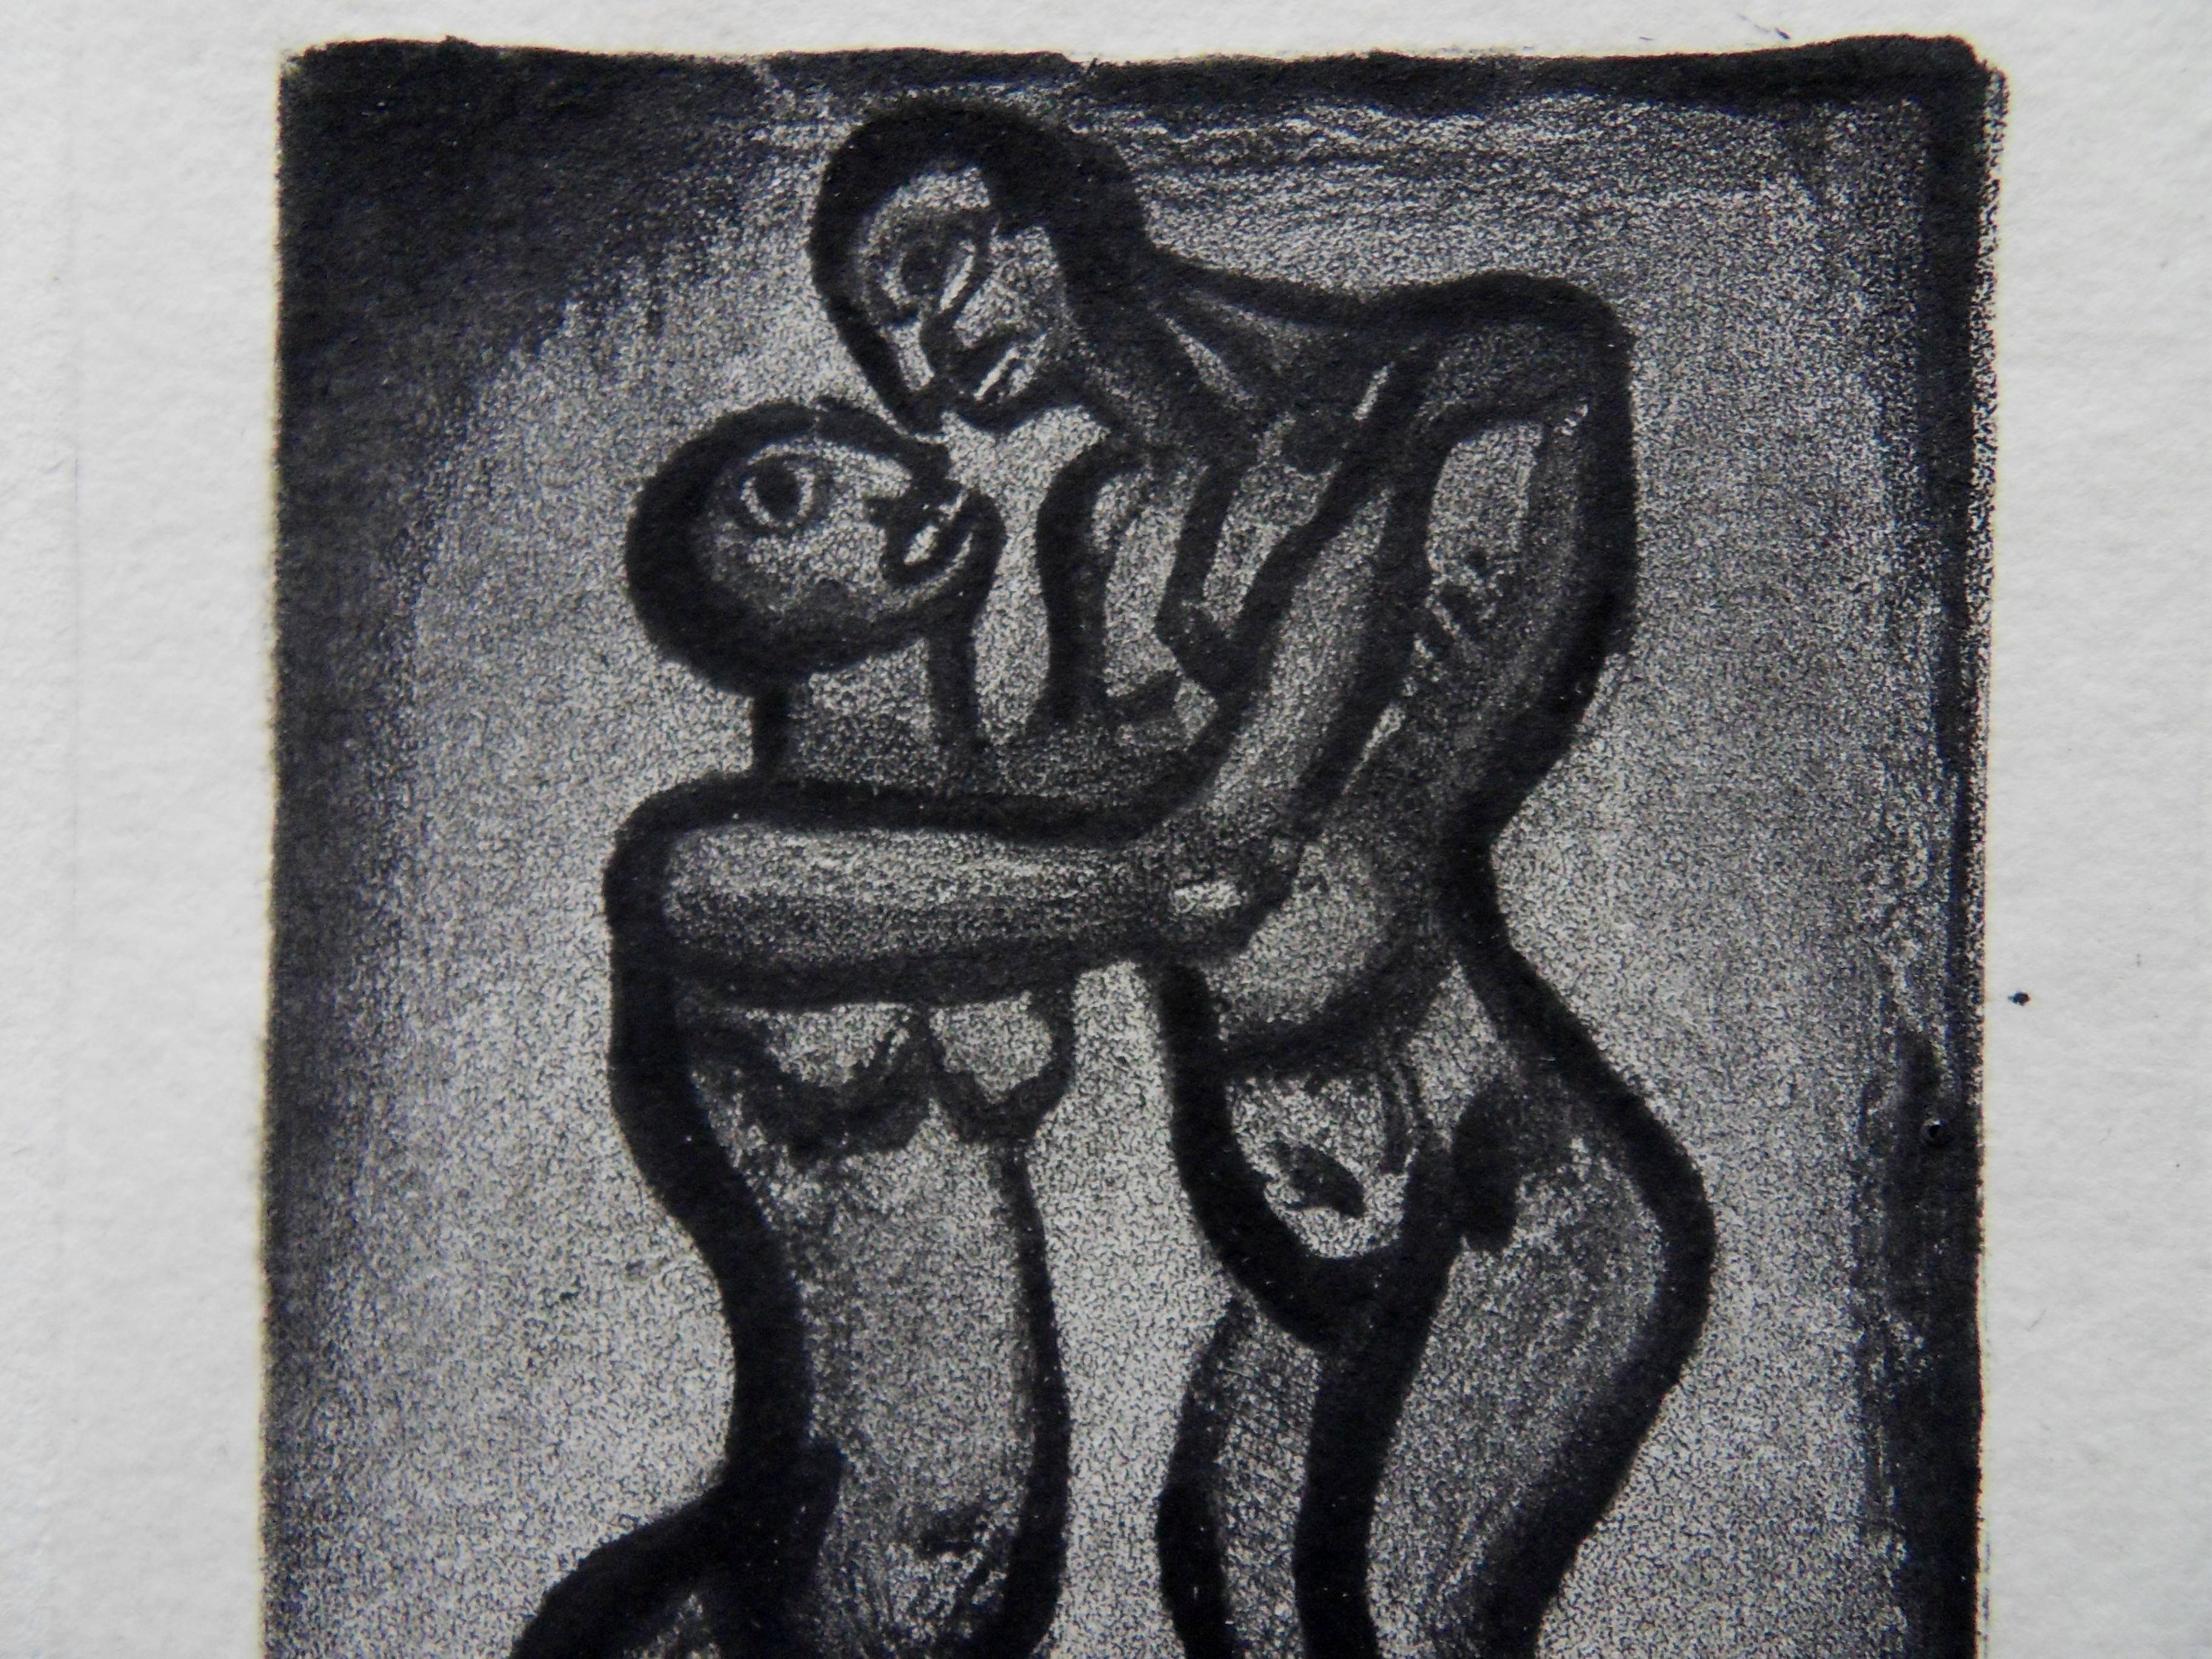 Couple Hugging - Original etching - 1929 - Gray Figurative Print by Georges Rouault